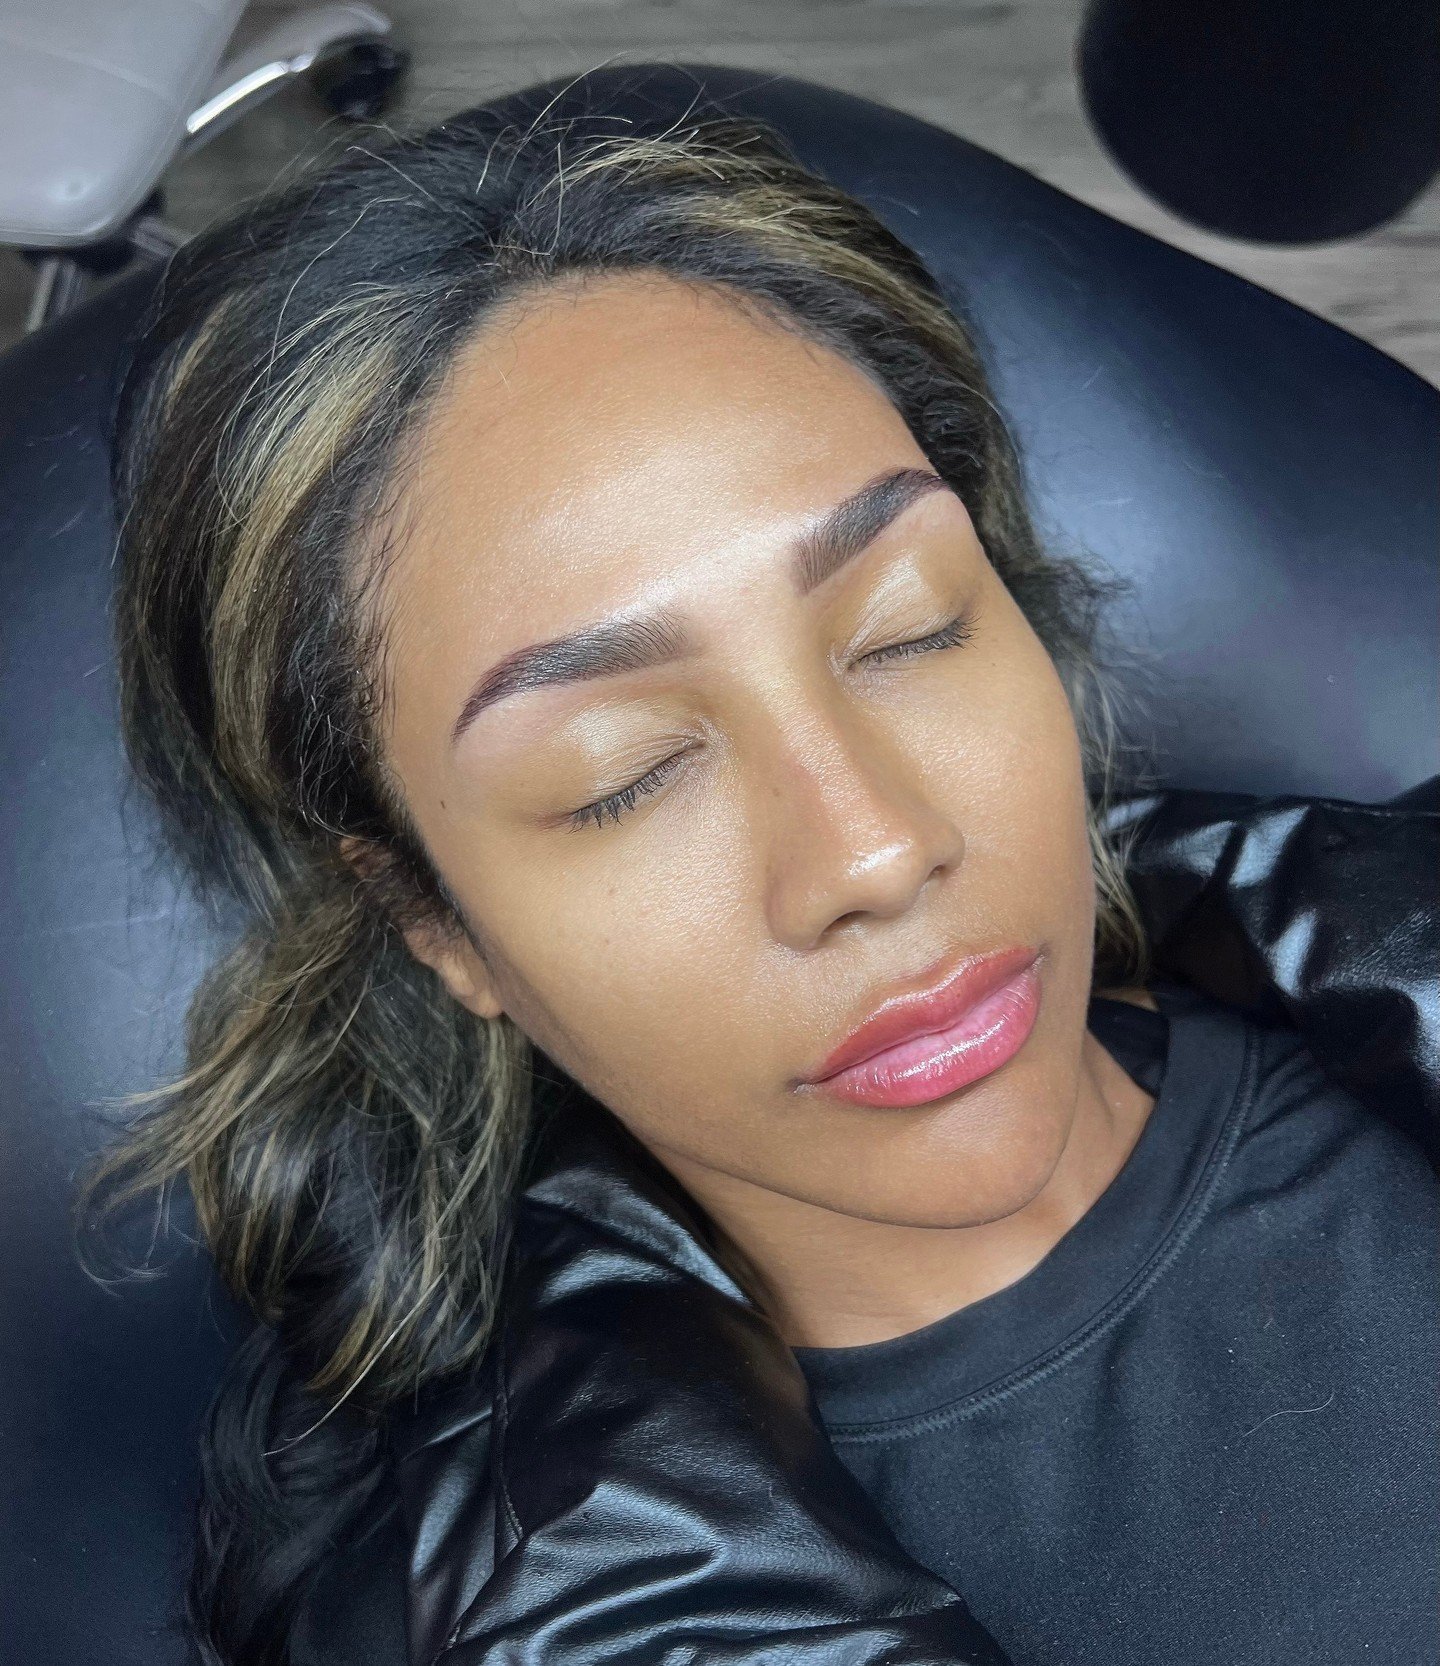 Transform your brows with brow henna! Experience natural-looking fullness and defined arches that last up to 2 weeks on the skin. Embrace the beauty of flawless brows and elevate your look effortlessly! 

Artist: Andrea
Service: Brow Henna 

#BrowHen